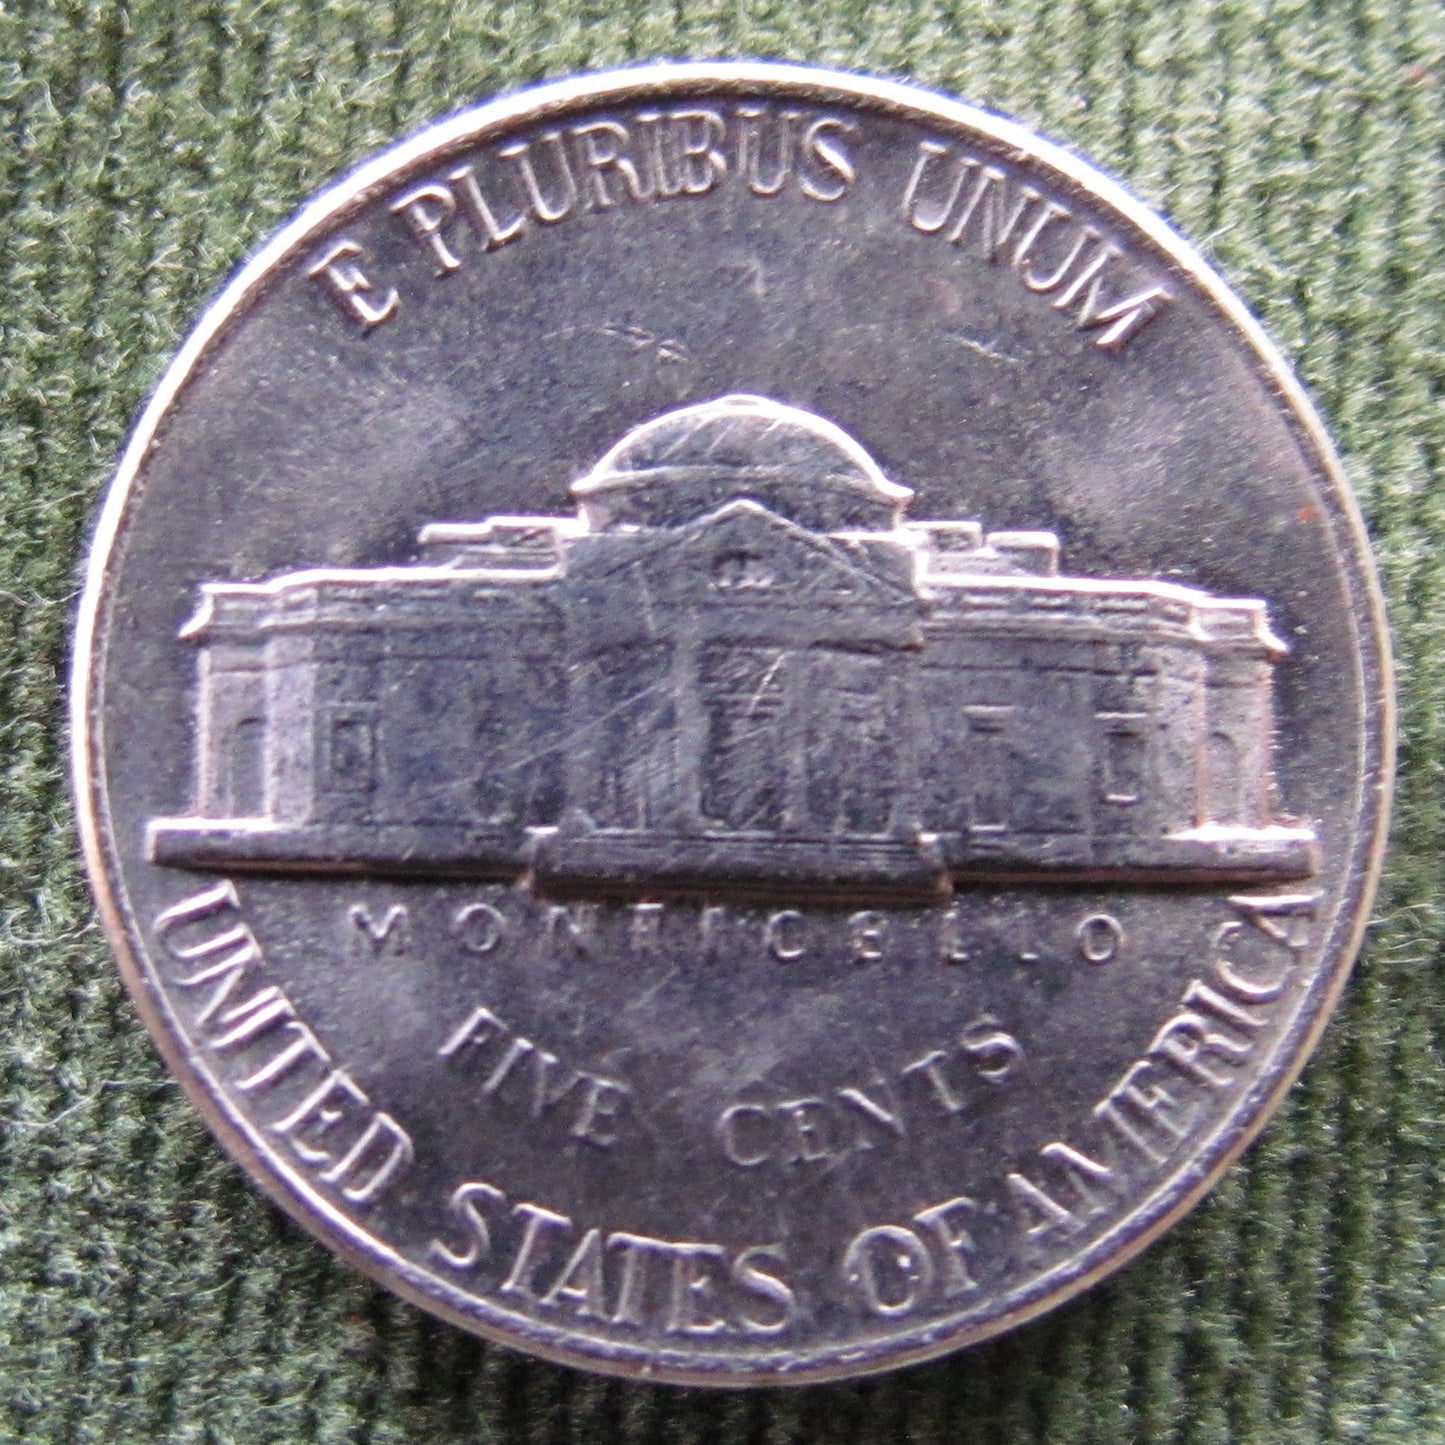 USA American 1990 D Nickel Jefferson Coin - Circulated